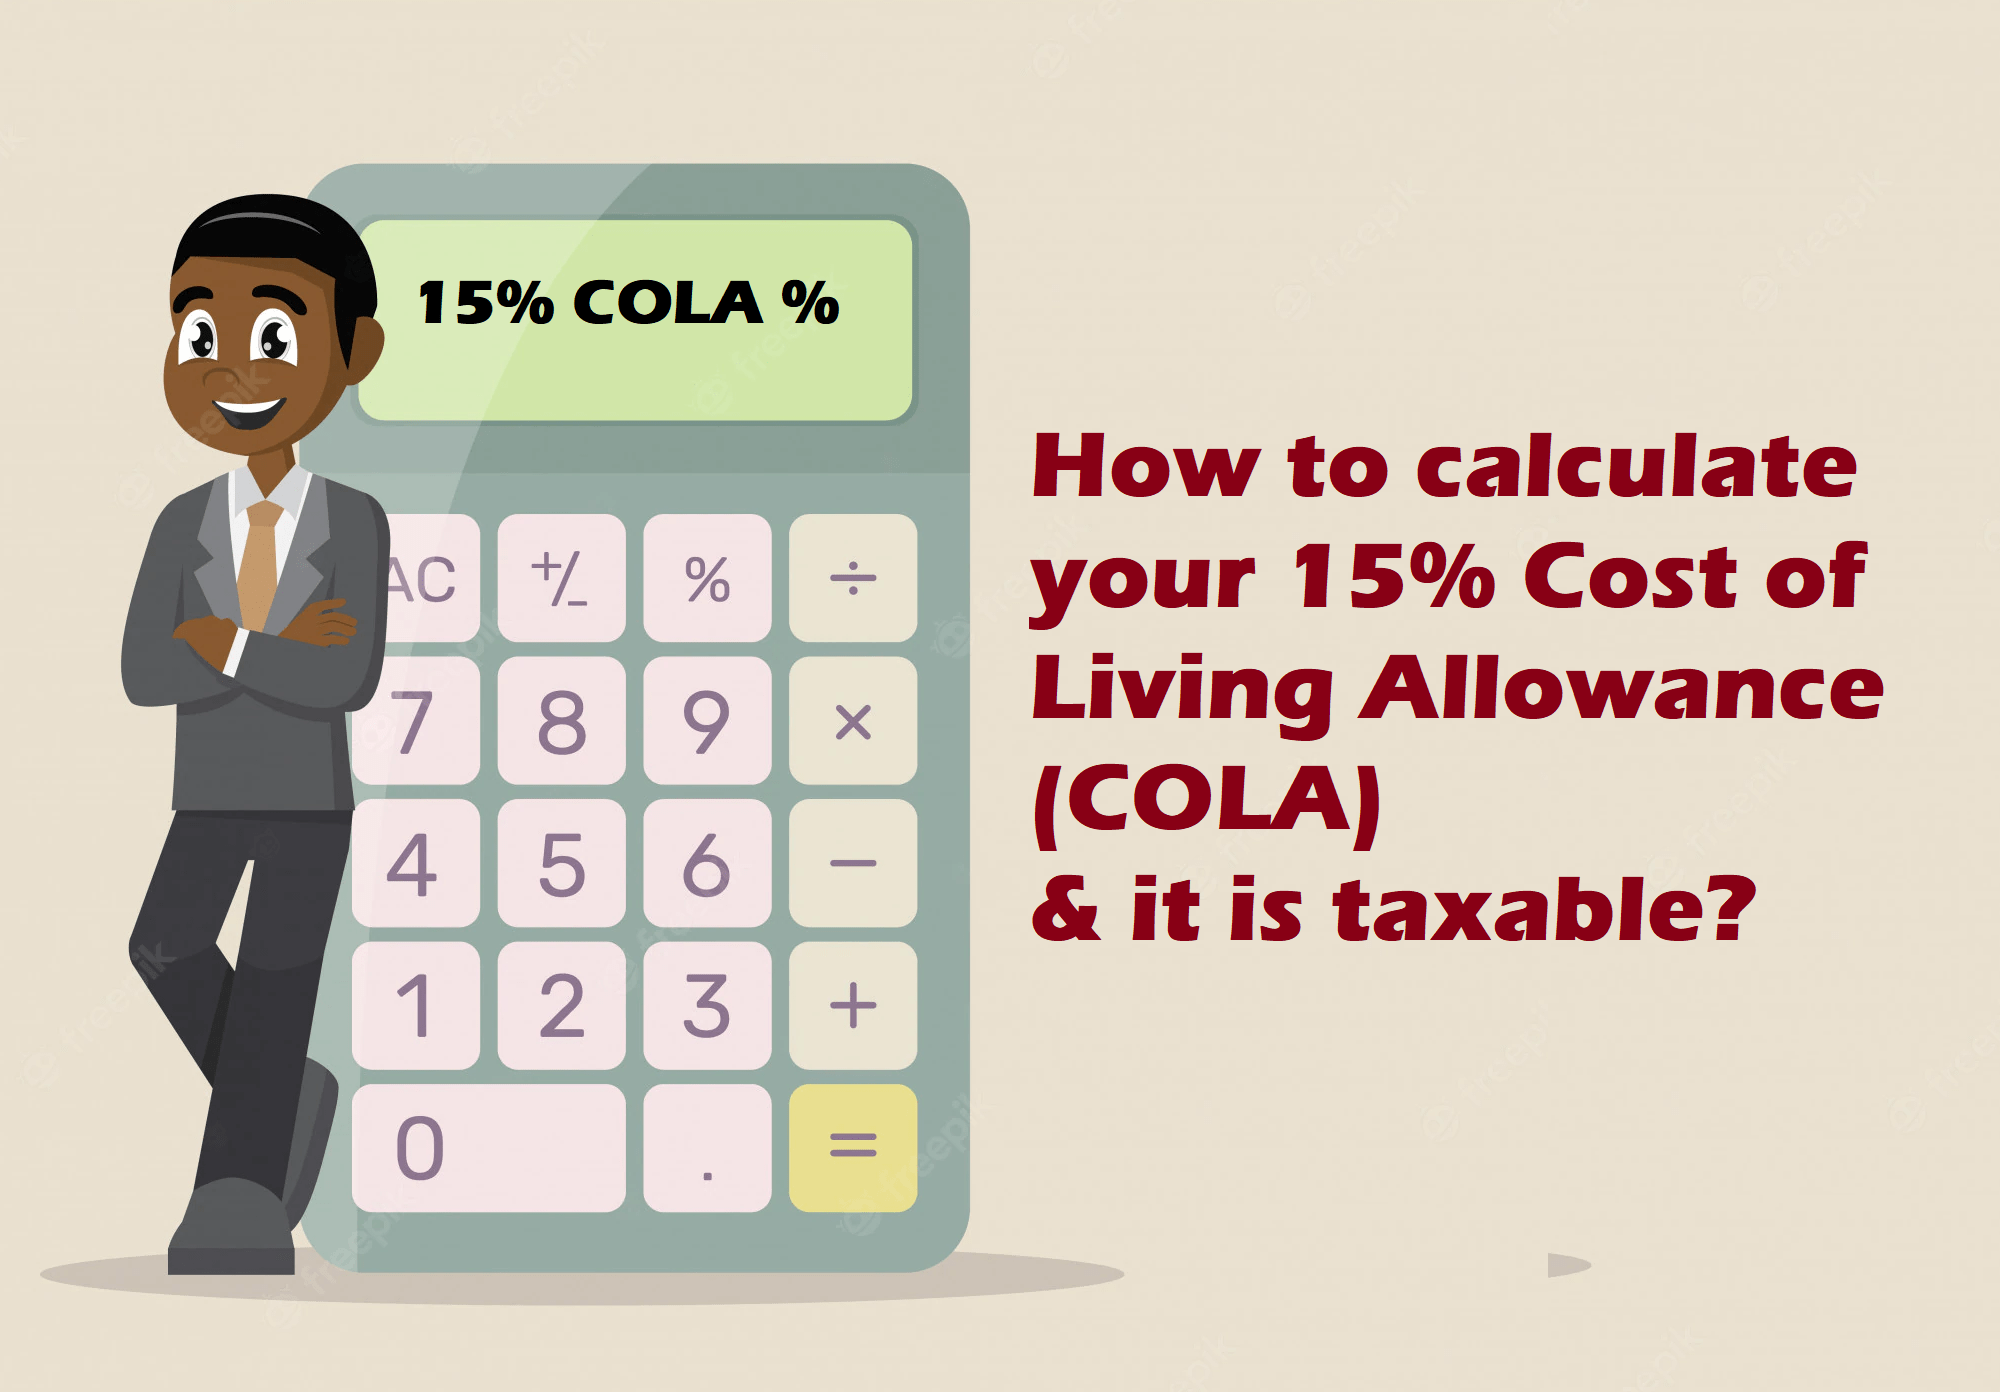 HOW  TO CALCULATE 15% COST OF LIVING ALLOWANCE (COLA)